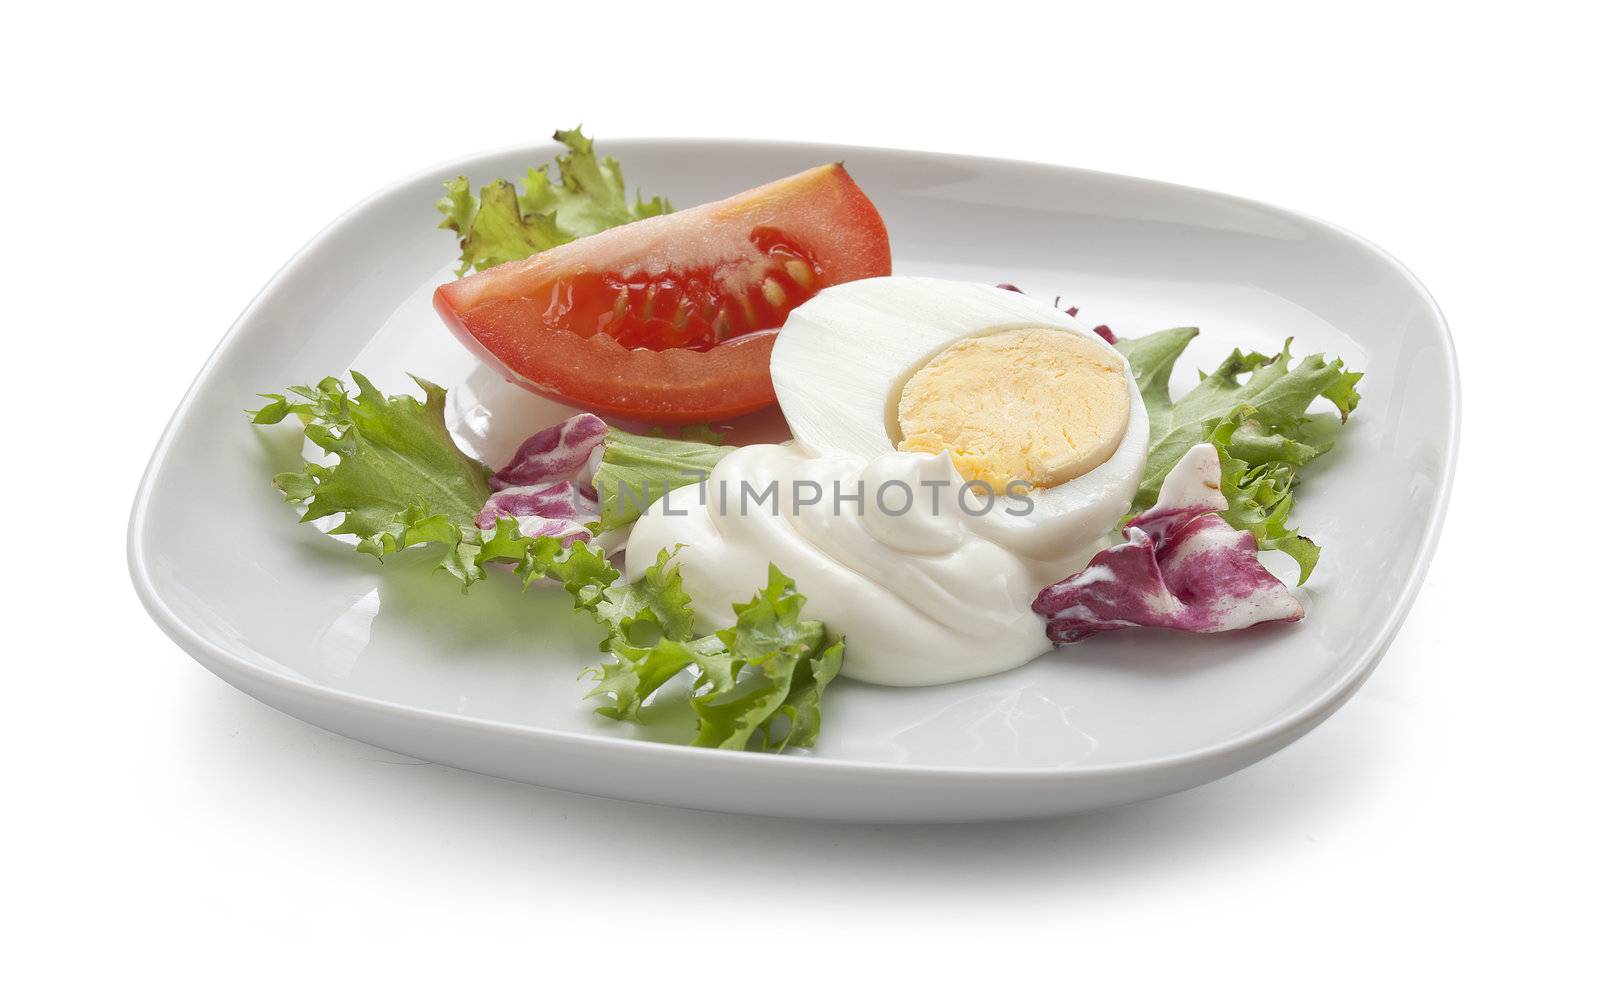 Egg and tomato with salad by Angorius